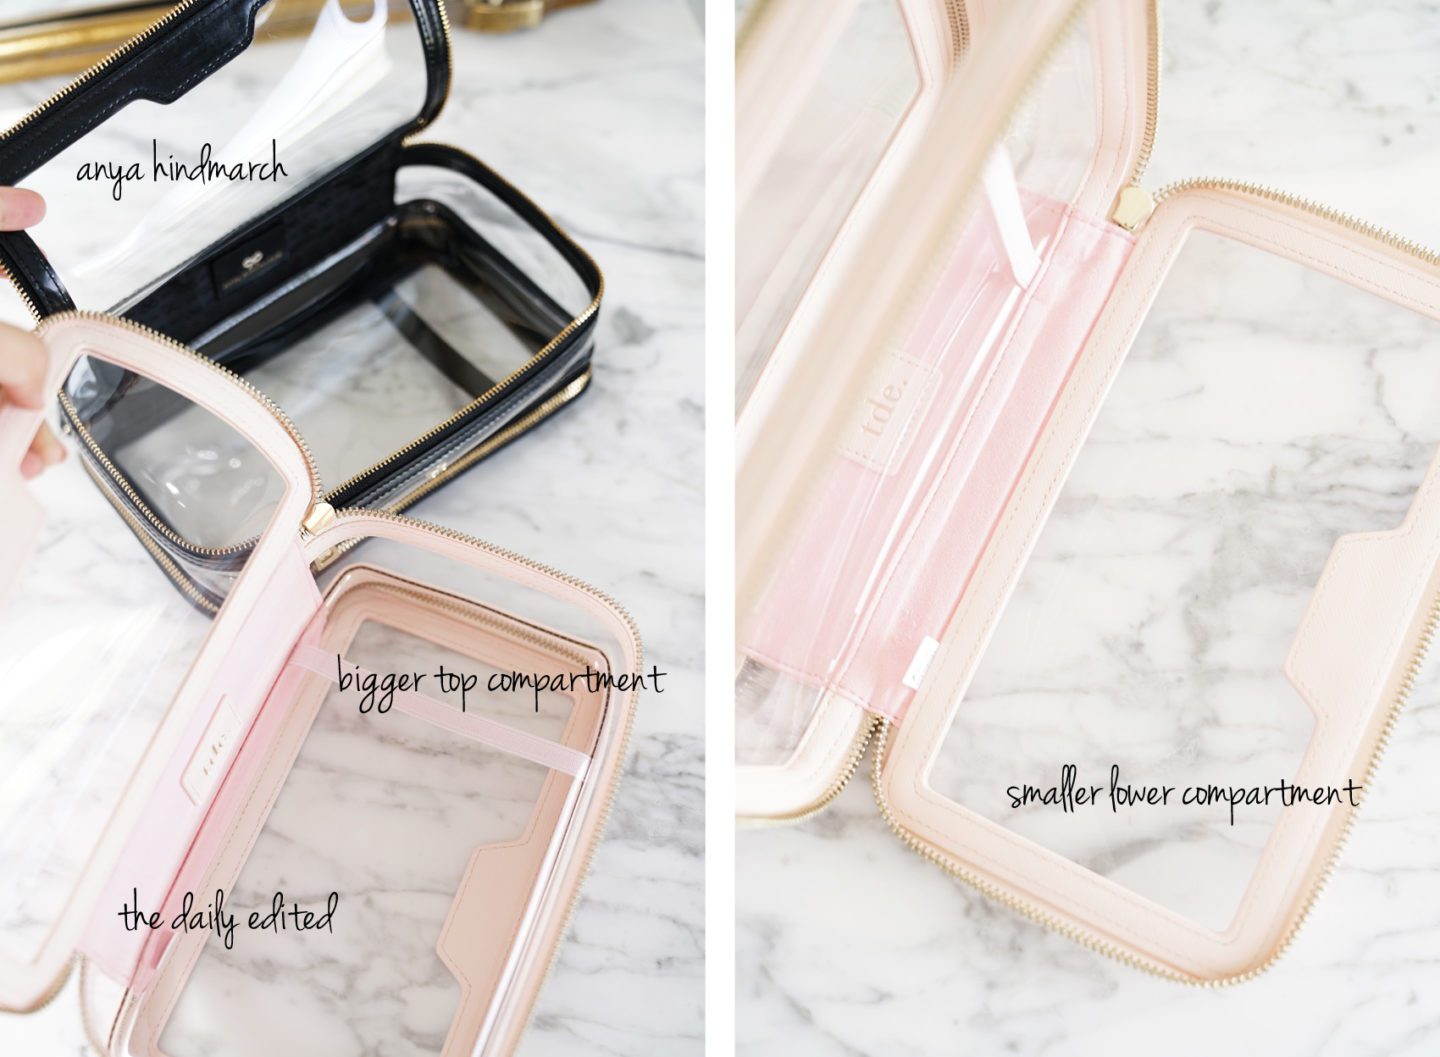 The Daily Edited Transparent Cosmetic Case vs Anya Hindmarch Inflight Travel Case